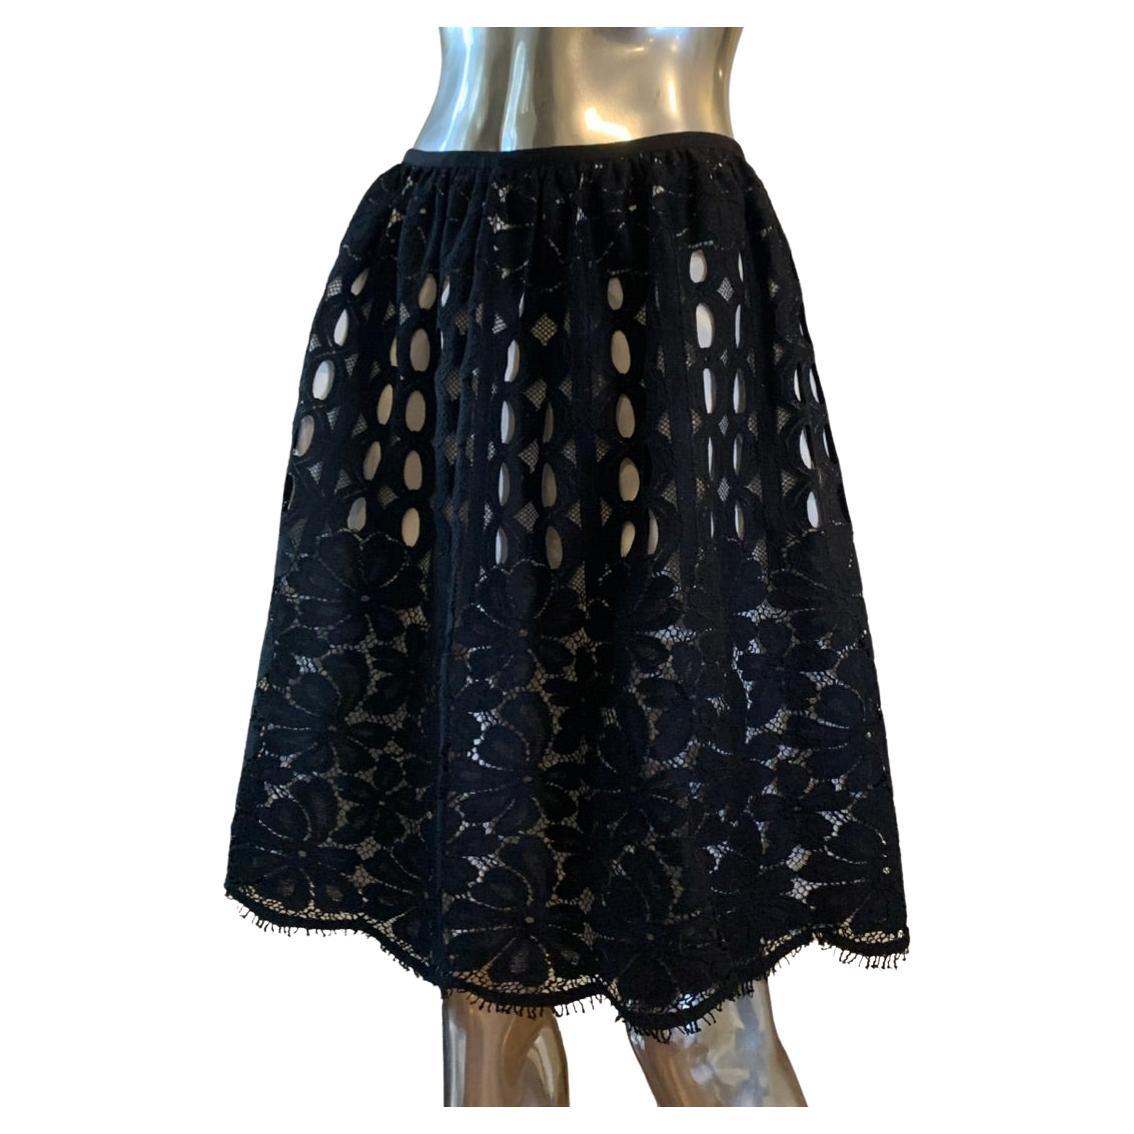 Lanvin Paris 2015 Collection Black Lace Lined Skirt by Alber Elbaz. NWT Size 6 For Sale